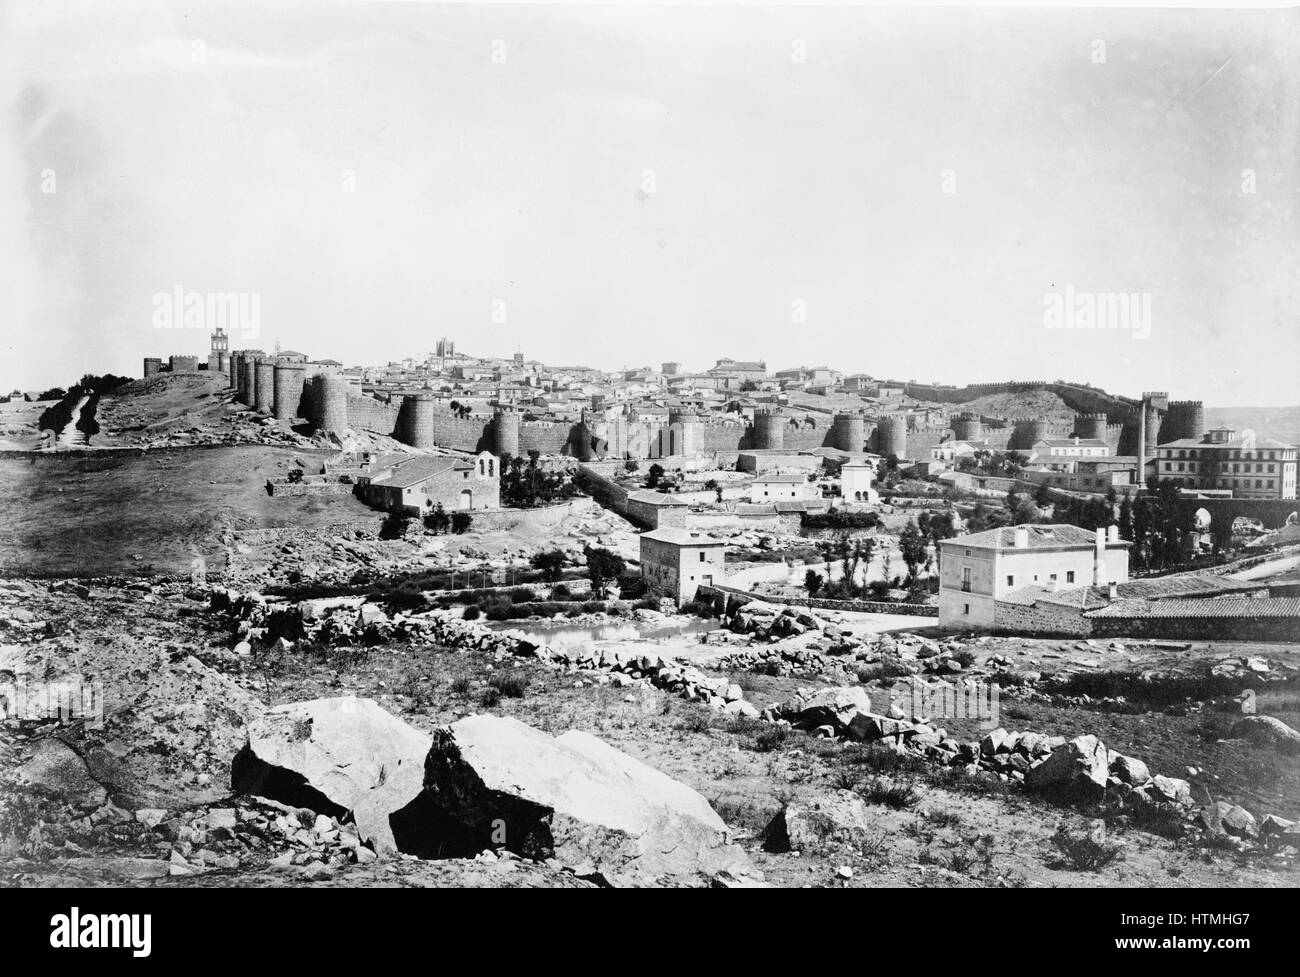 View of Avila showing wall around old part of city. photographic print : albumen. [between 1860 and 1880] Stock Photo